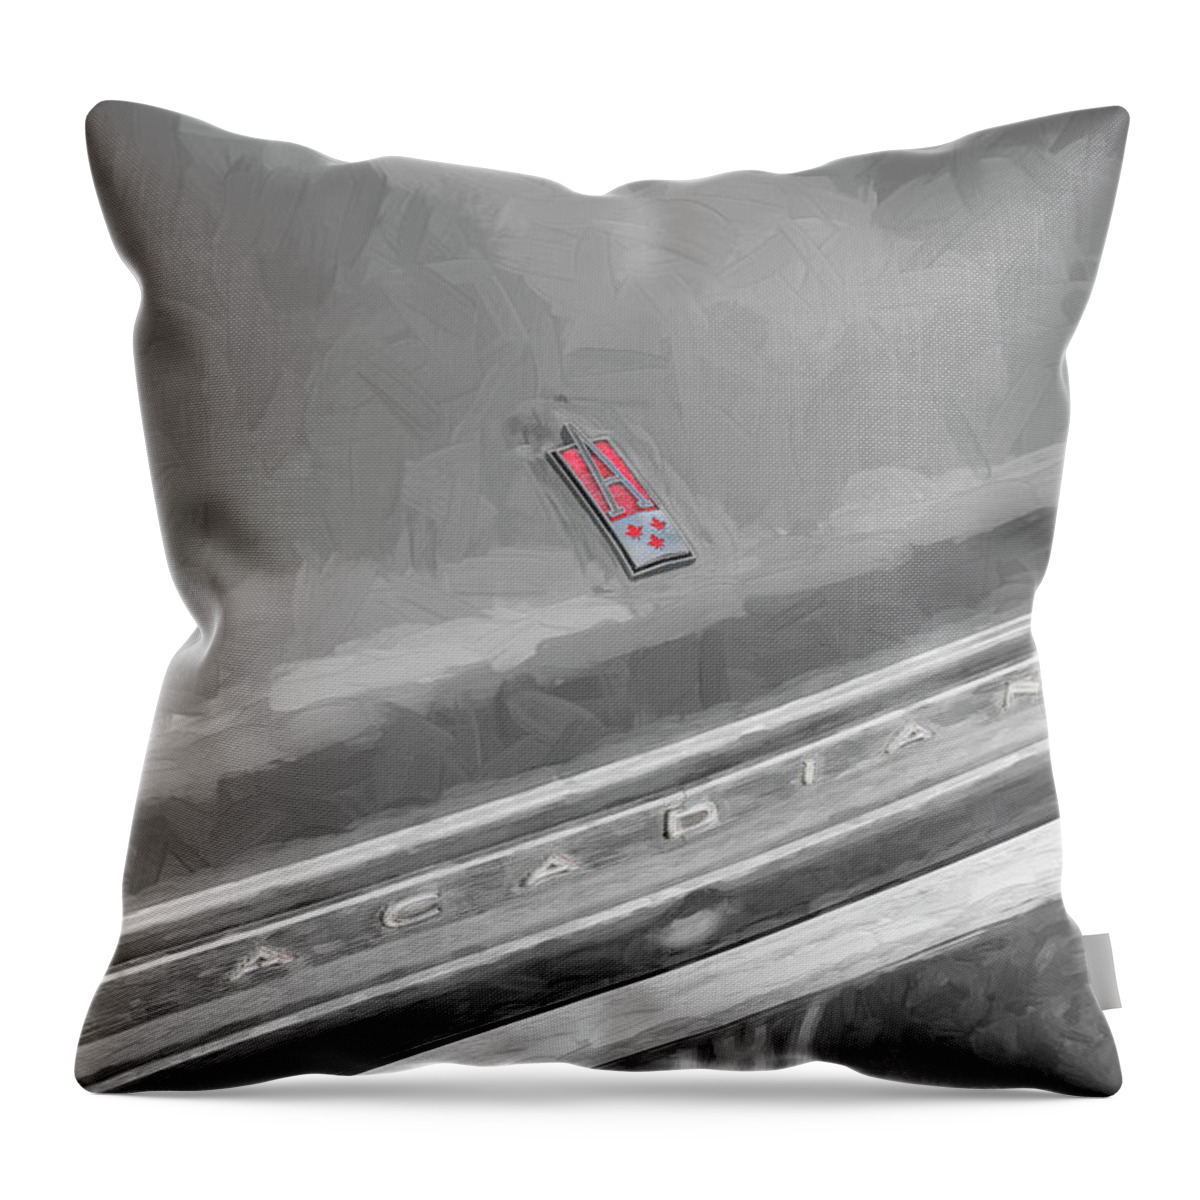 1967 Acadian Canso Sd Sport Deluxe Throw Pillow featuring the photograph 1967 Acadian Canso SD Sport Deluxe X112 by Rich Franco